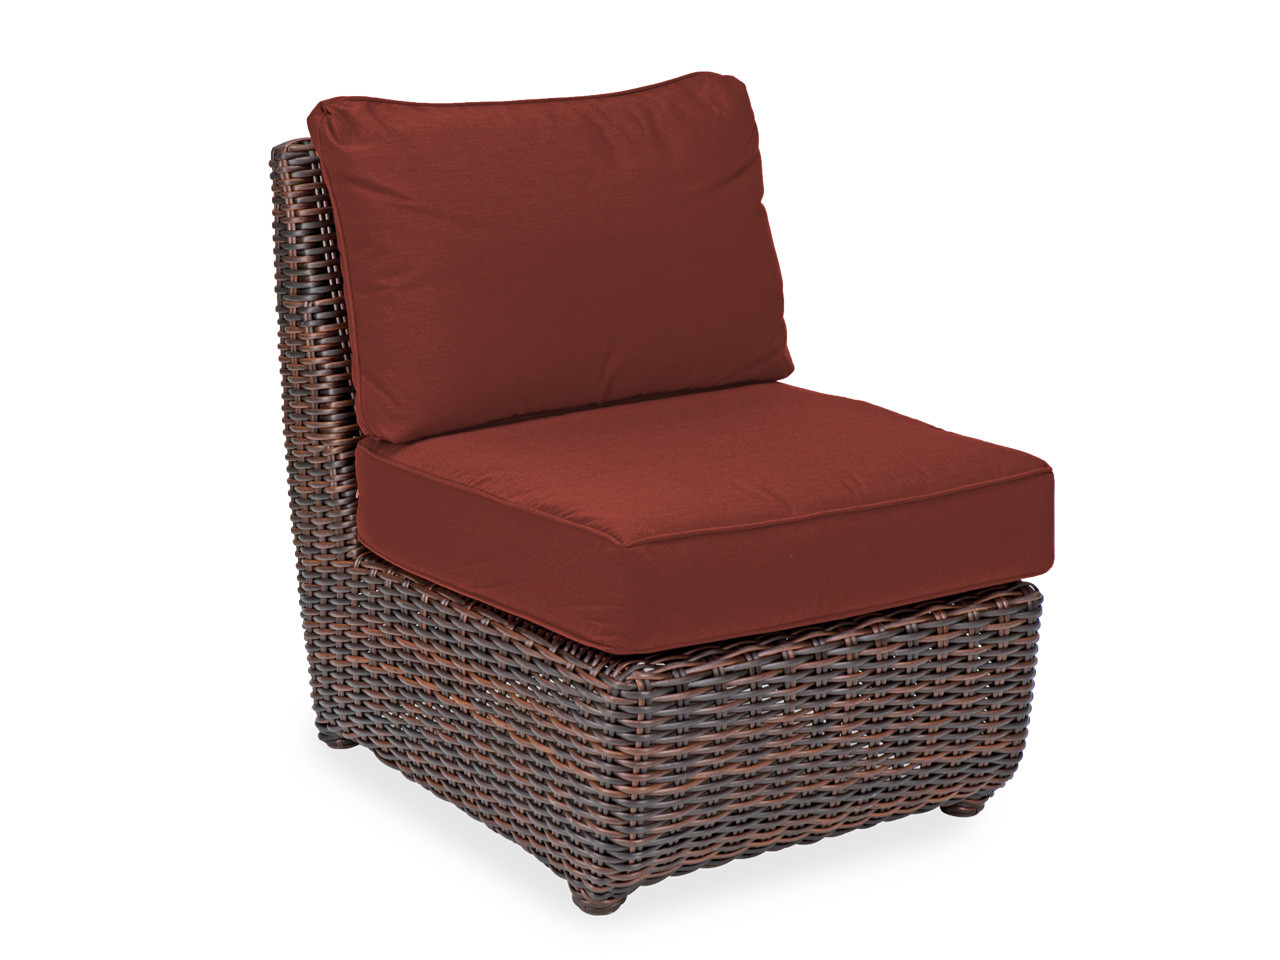 Biscayne Sangria Outdoor Wicker and Canvas Henna 3 Pc. Cushion Sectional with Right Arm Facing Snuggle Chaise Group